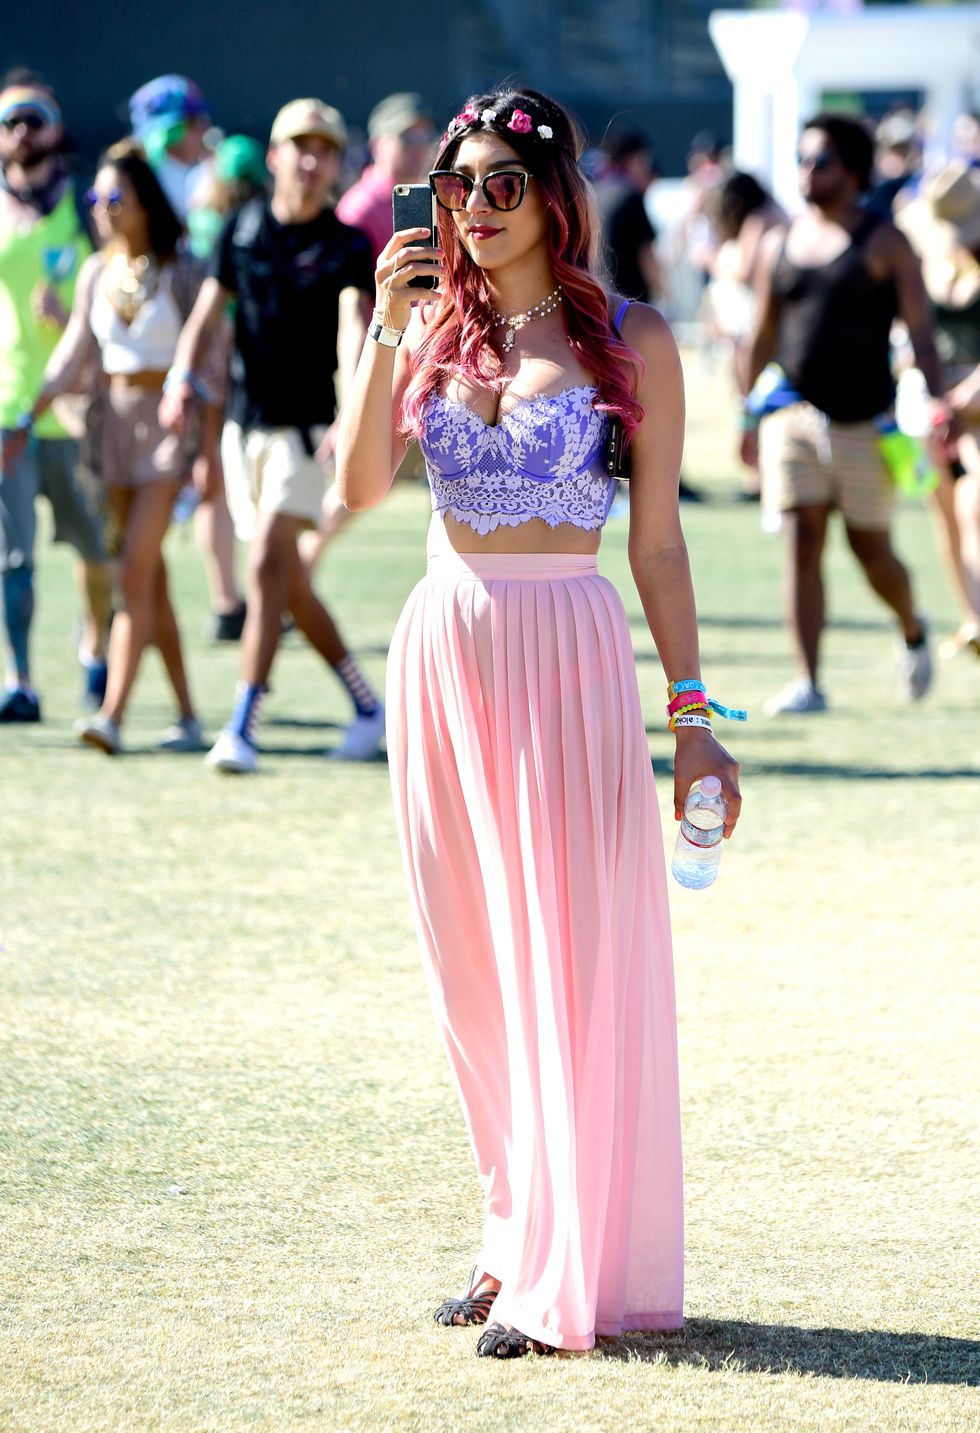 The Best Looks From Coachella '16 to Inspire Your Festival